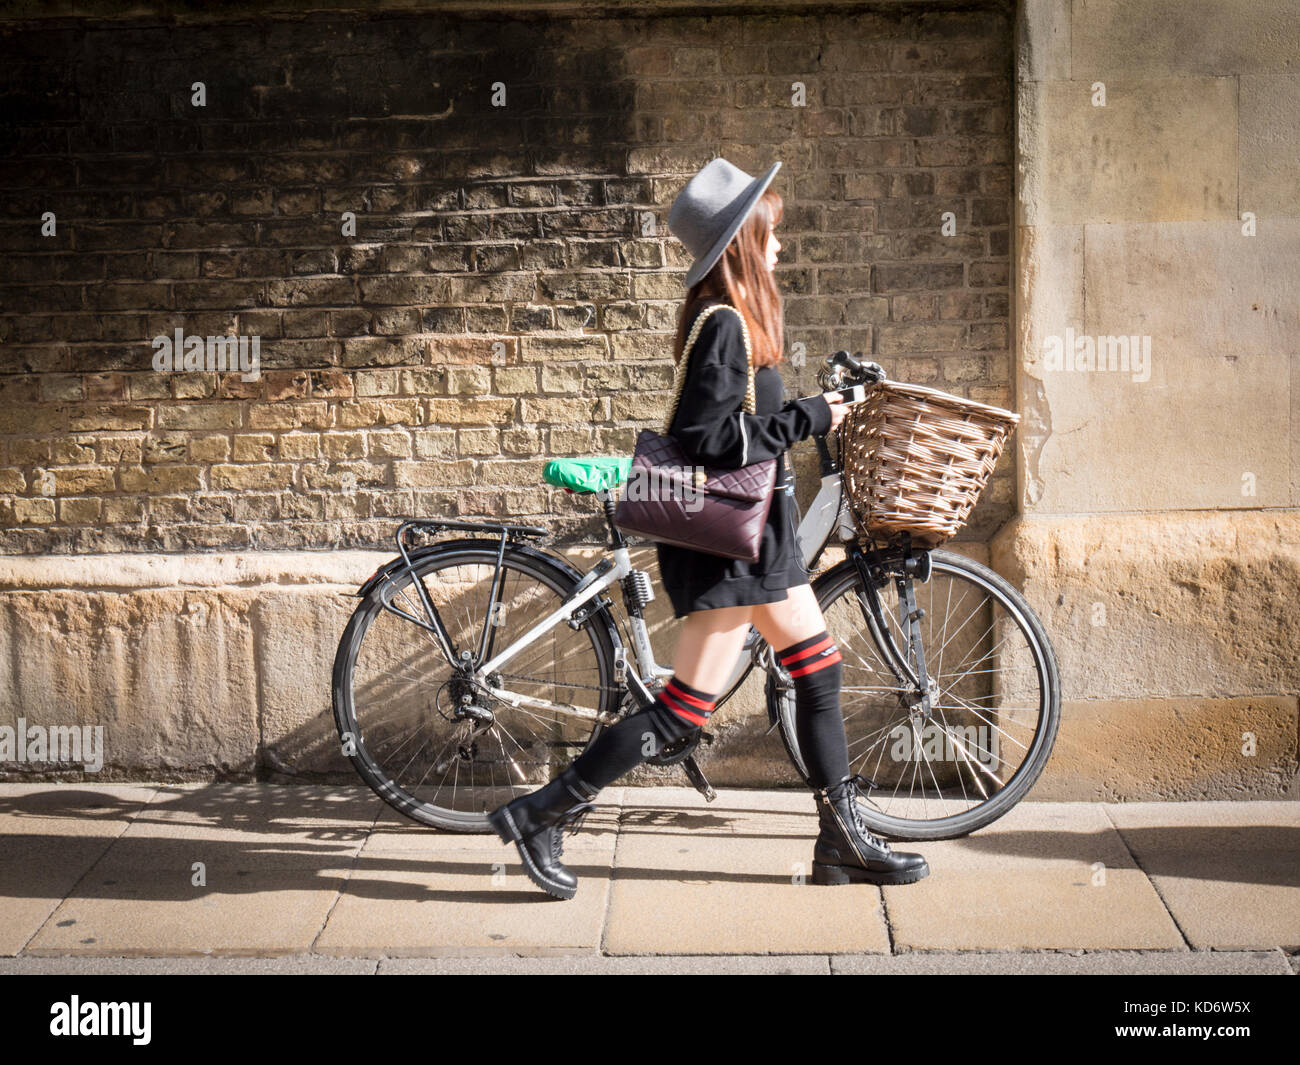 A Japanese woman wearing long socks walks past a bicycle with a basket leaning up against the wall of Sidney Sussex College part of Cambridge Universi Stock Photo